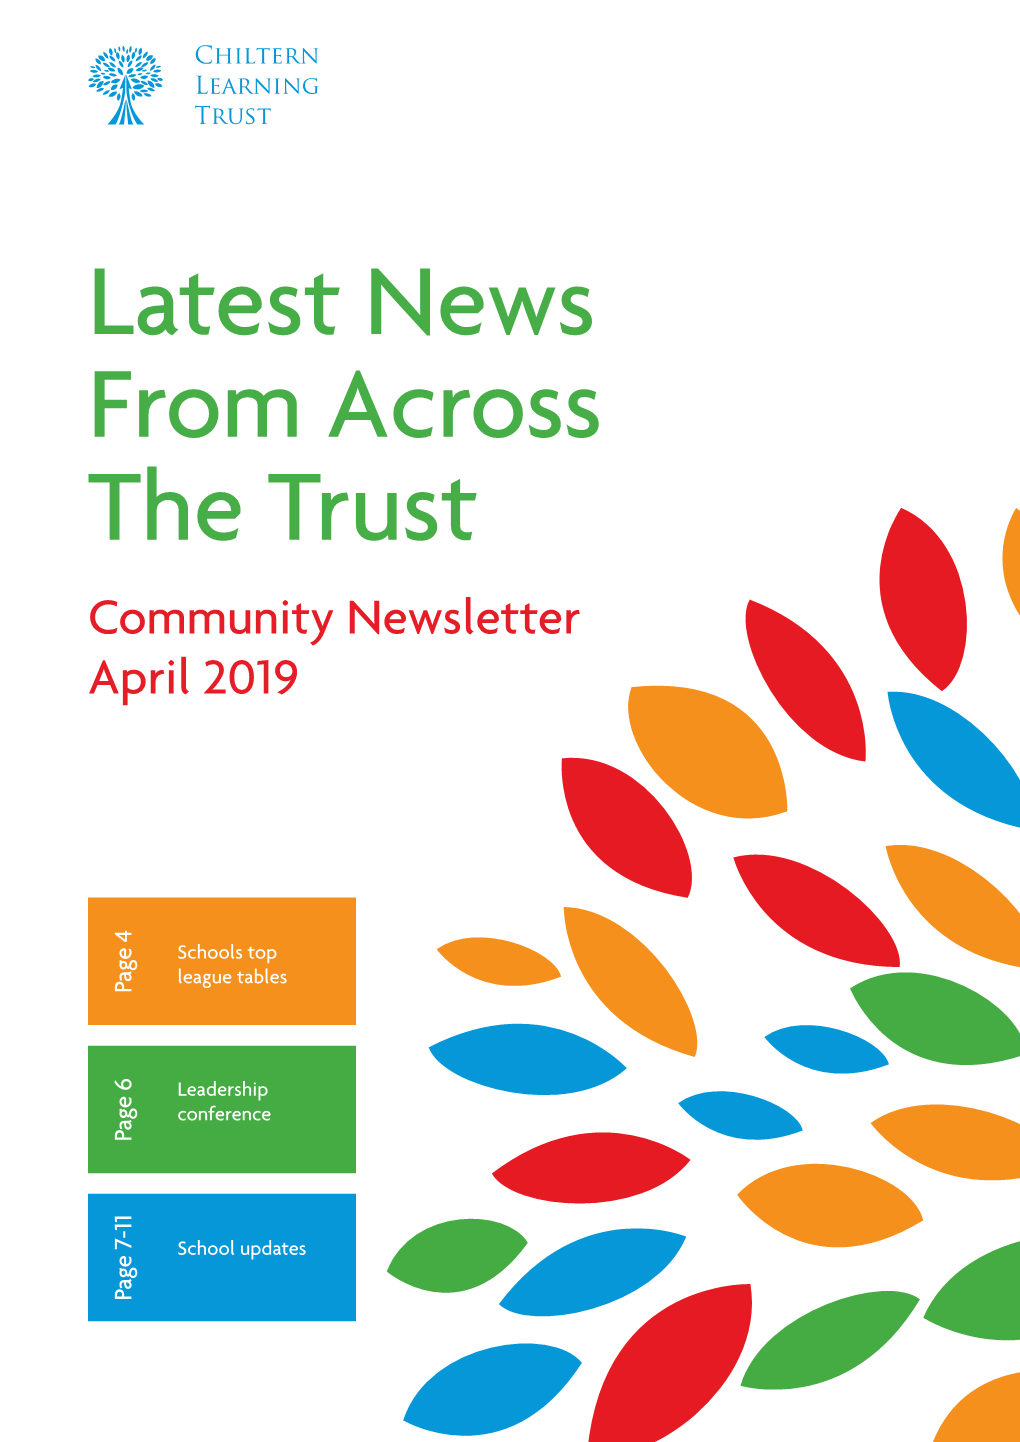 Latest News from Across the Trust Community Newsletter April 2019